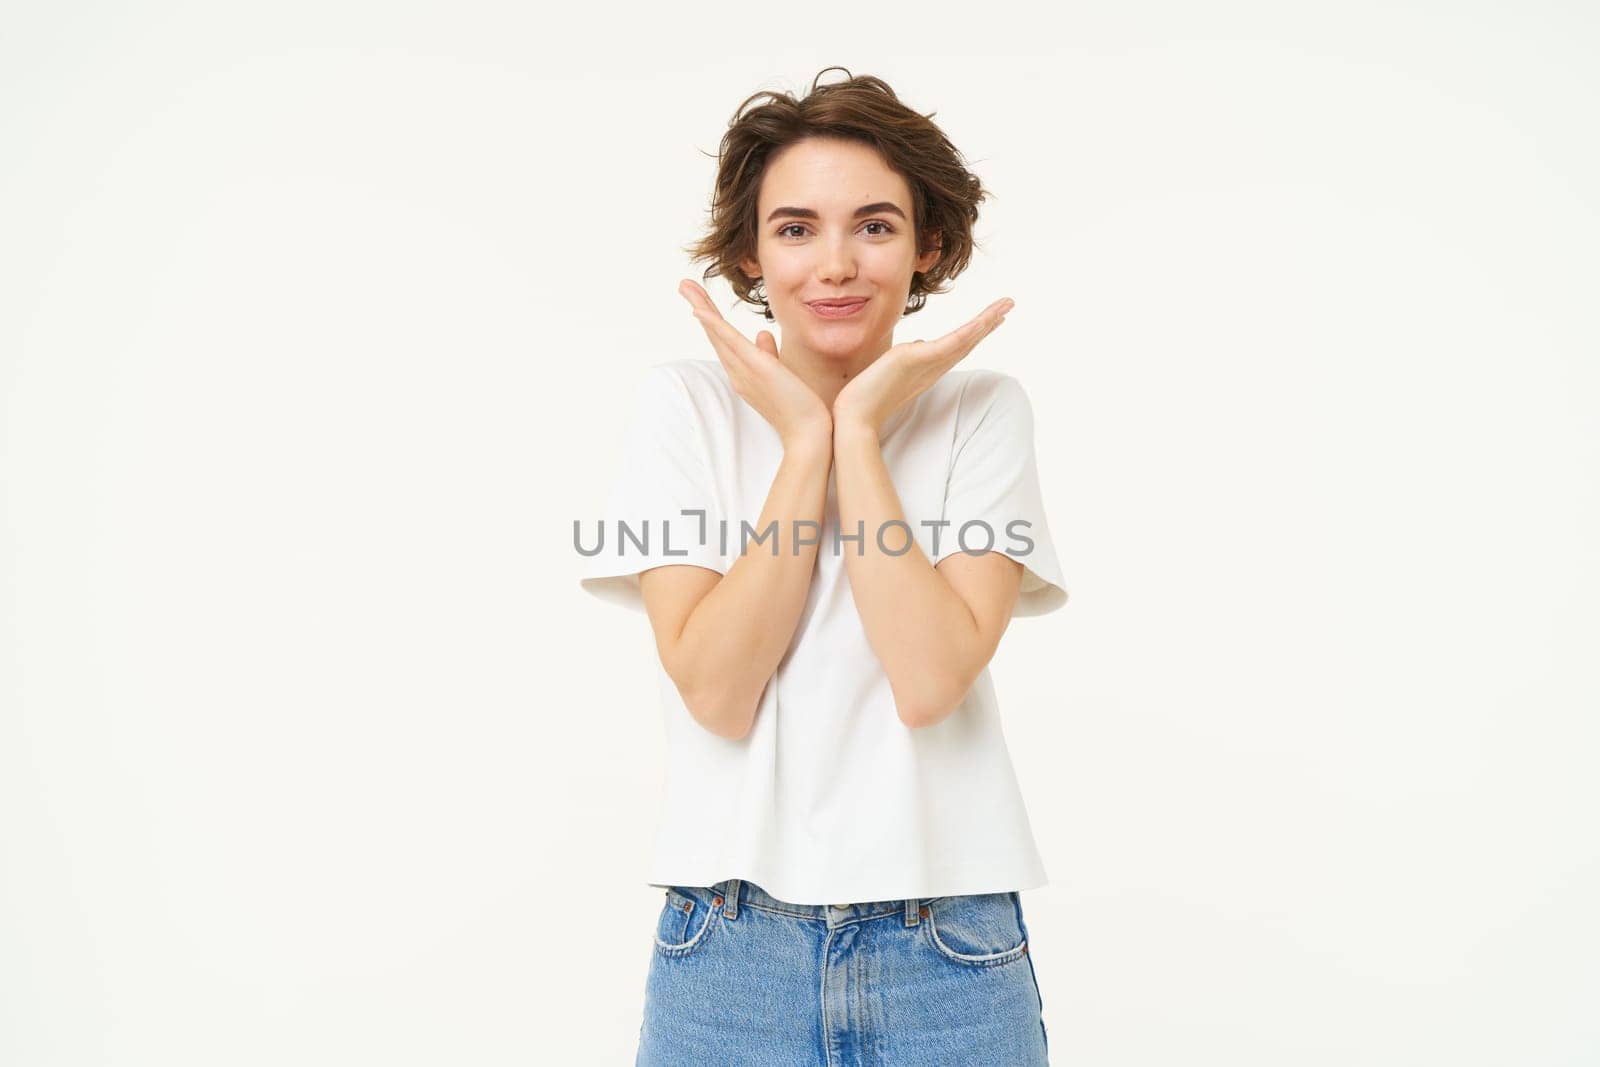 Portrait of cute brunette woman, looking with admiration and excitement, standing over white background.